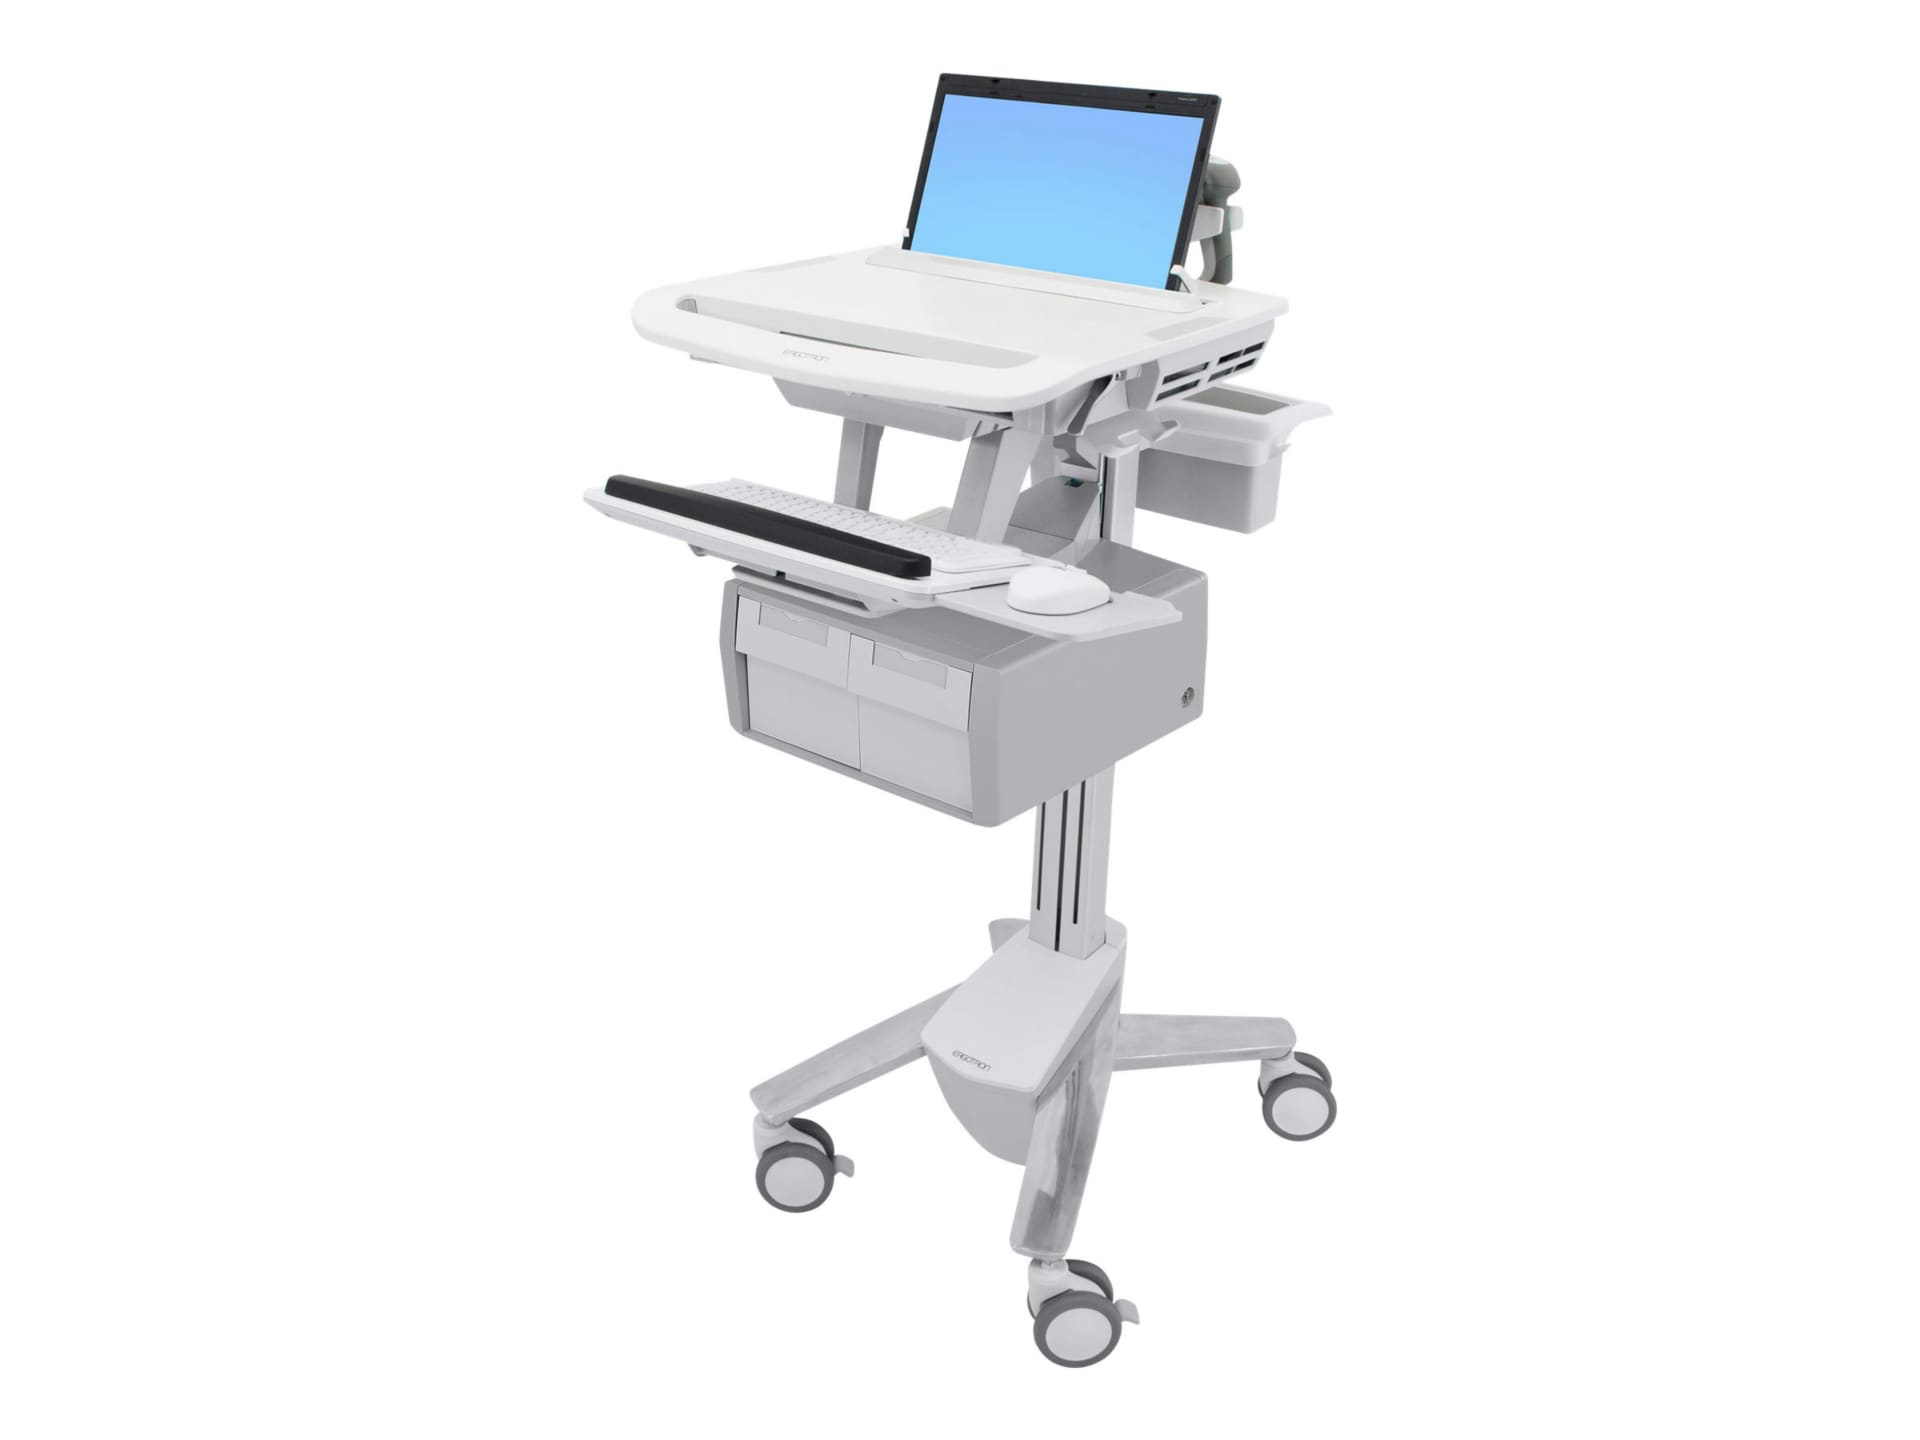 Ergotron StyleView cart - open architecture - for notebook / keyboard / mouse / barcode scanner